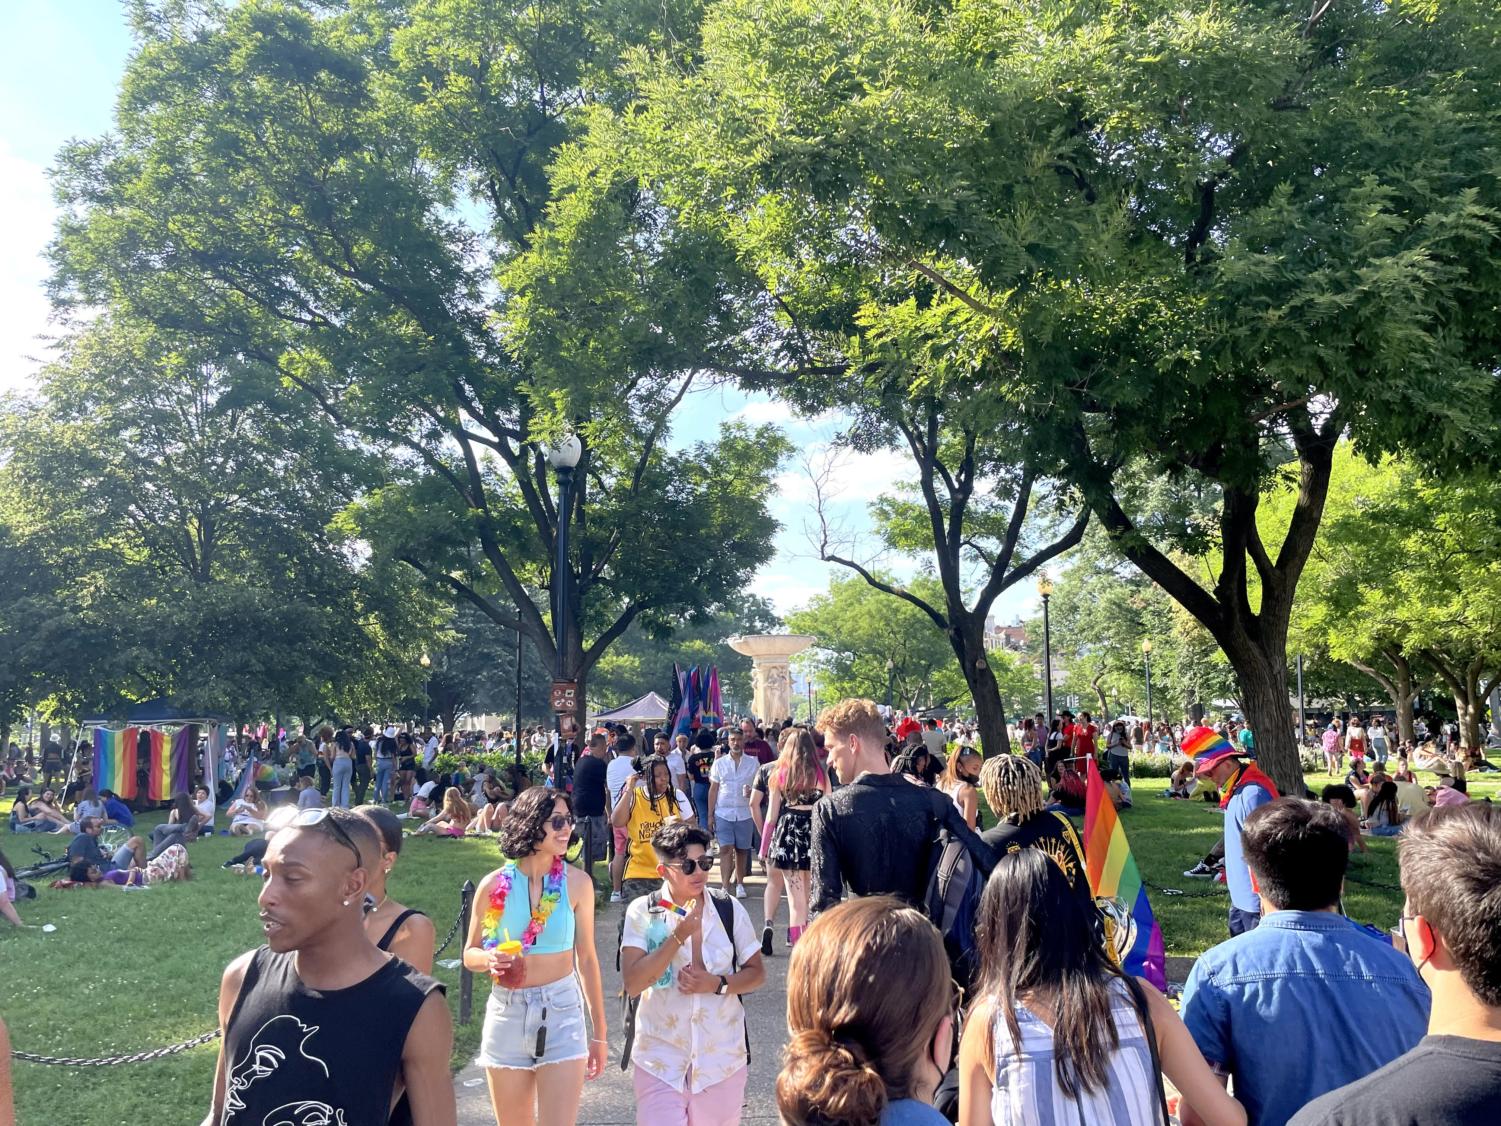 Nearing the end of the pride parade, the LGBTQ+ community gathers around at Dupont Circle, in D.C. on June 12, 2021.